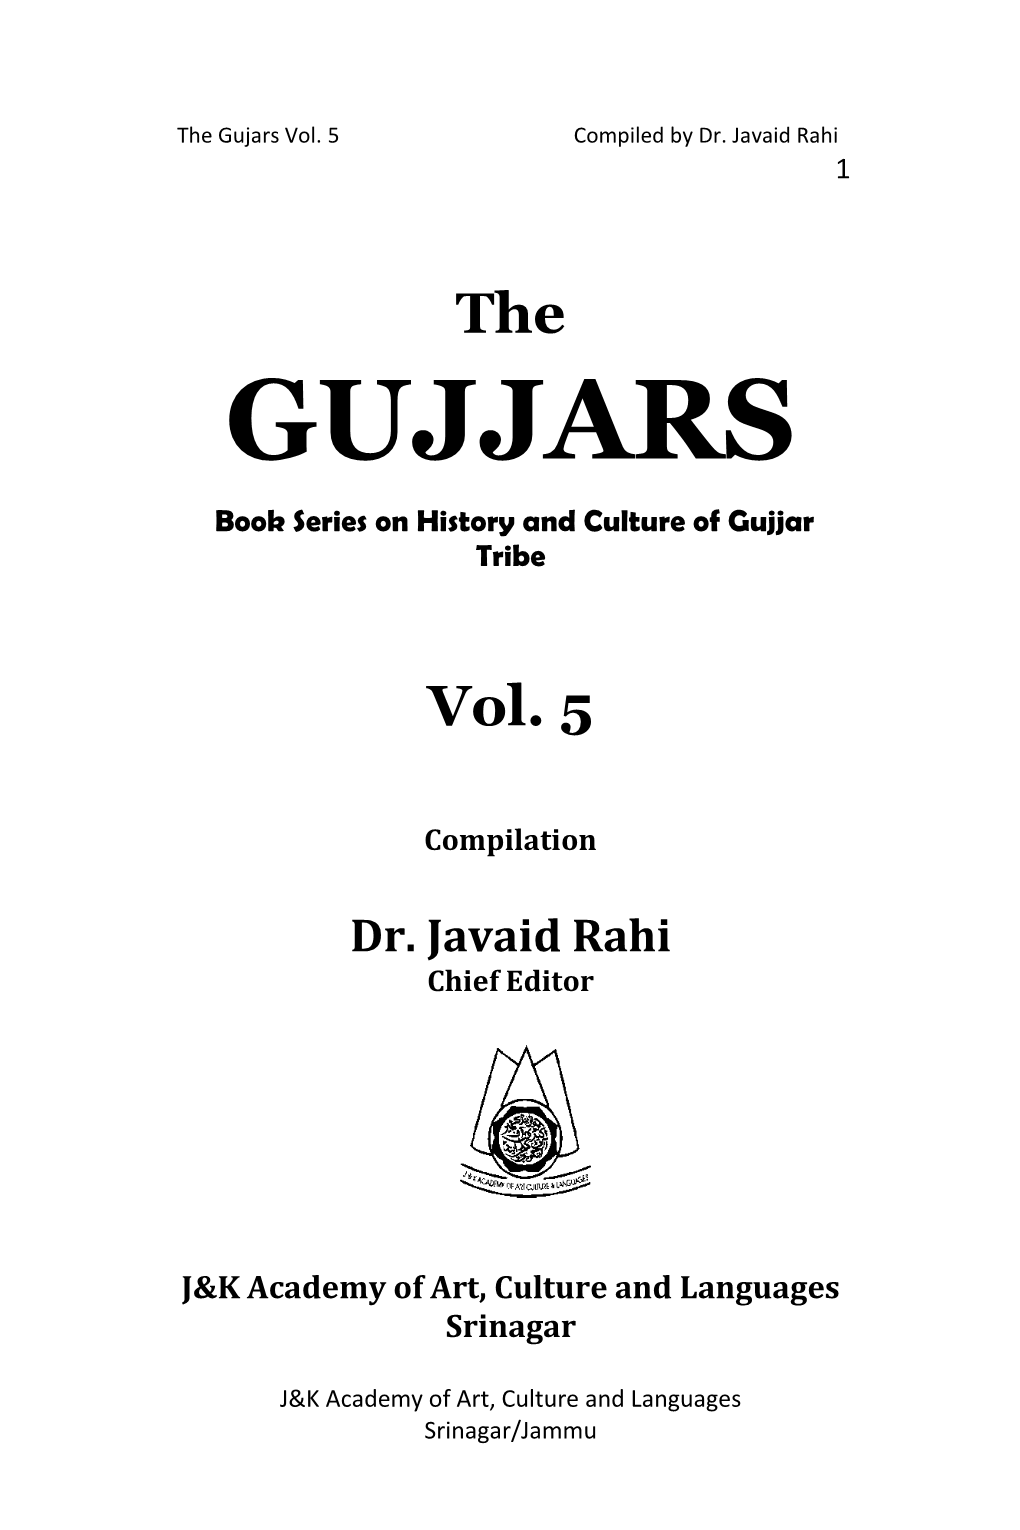 GUJJARS Book Series on History and Culture of Gujjar Tribe